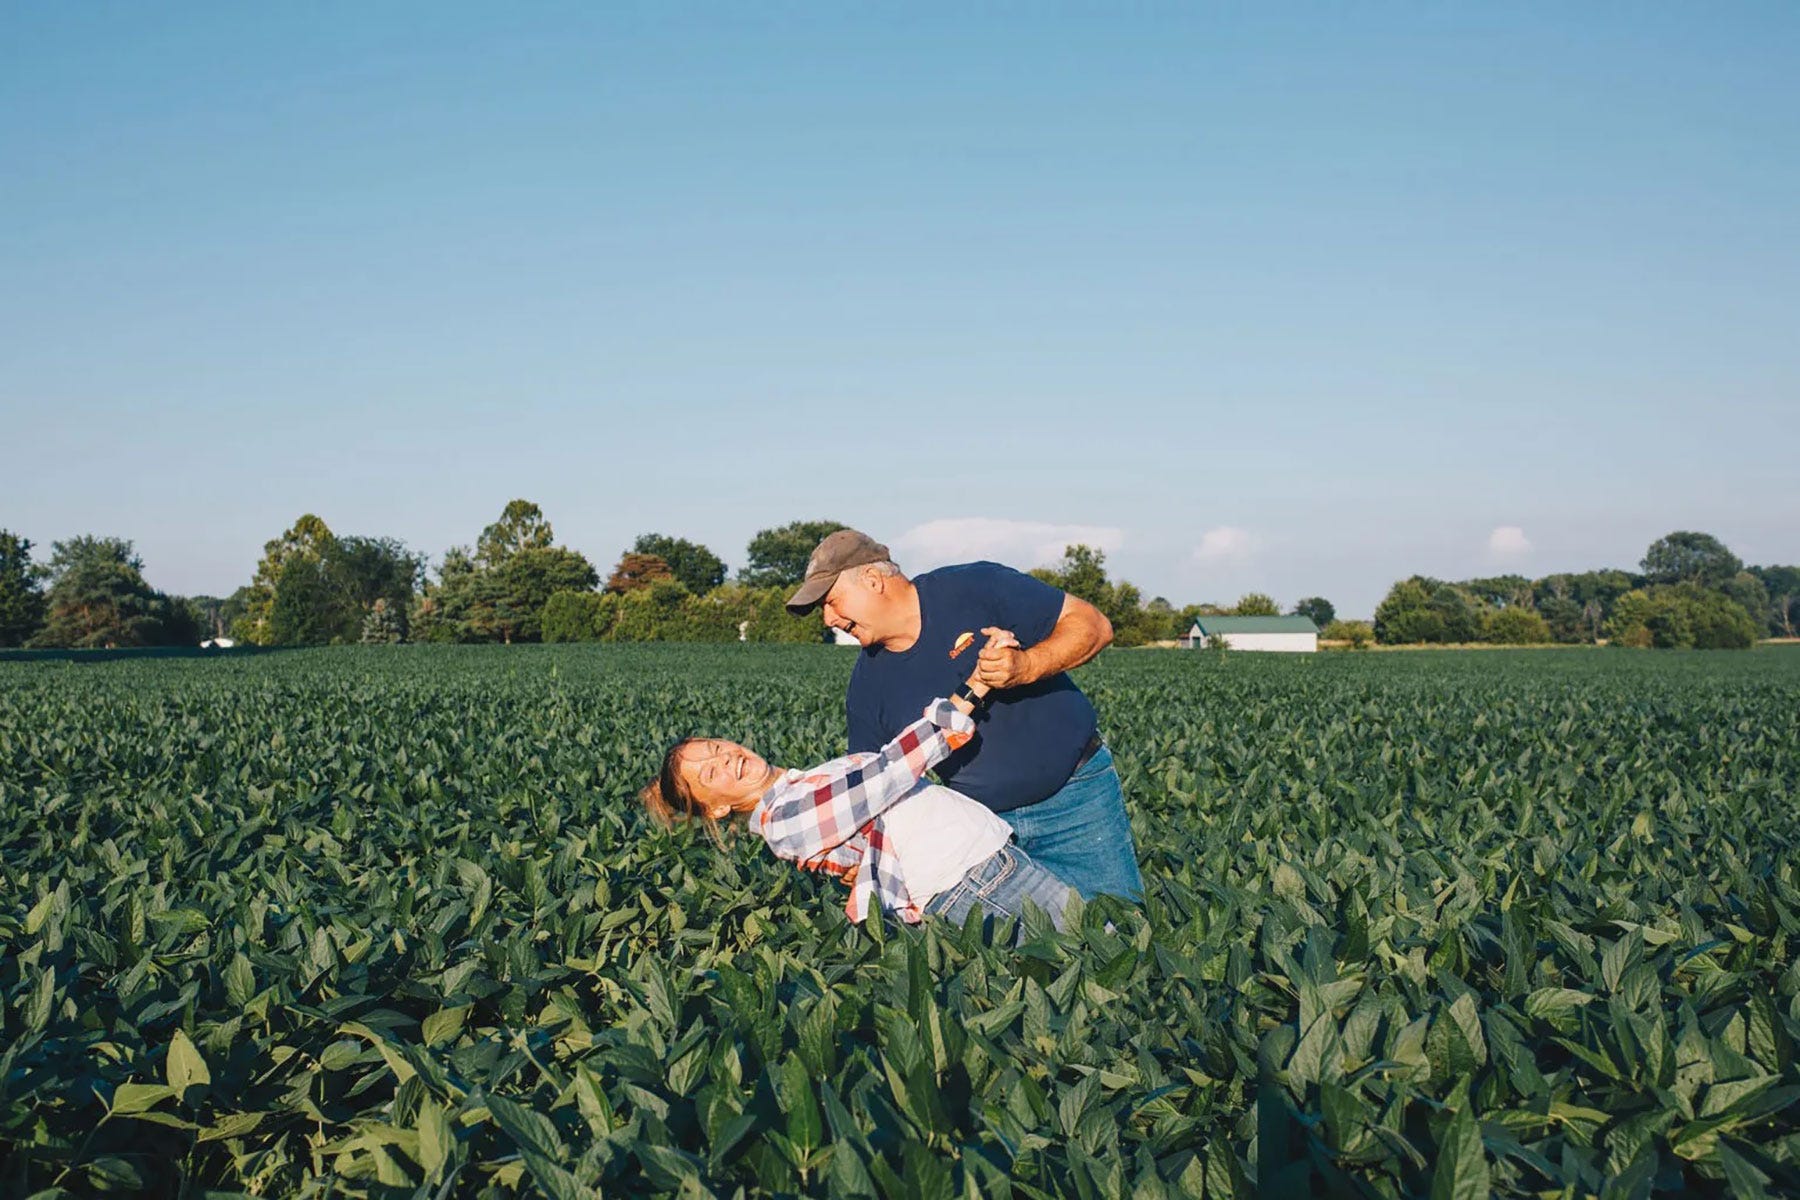 Chris and Jennifer Campbell dance in a field